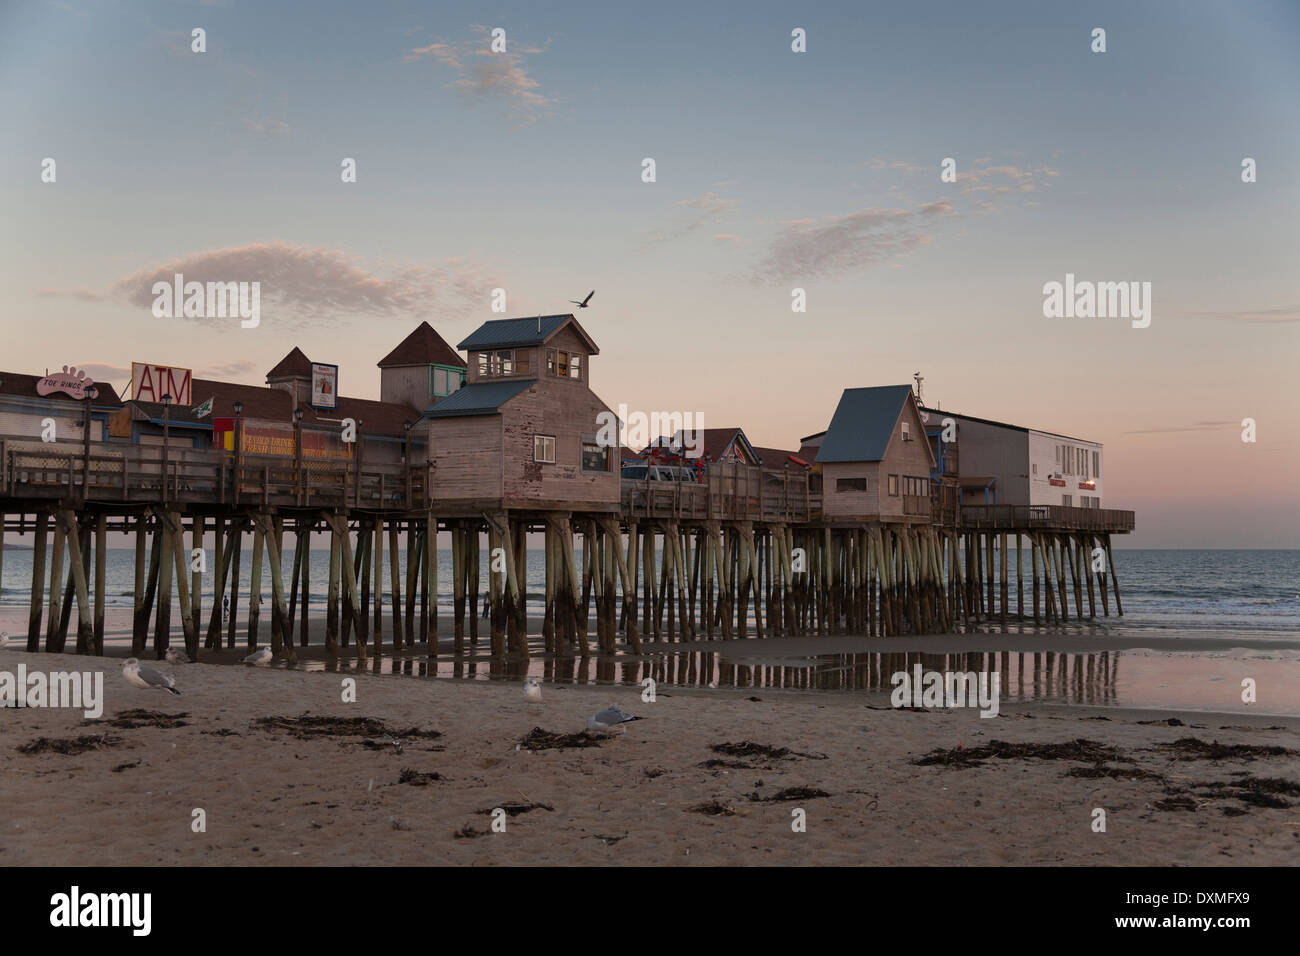 Pier at Old Orchard Beach, Maine Stock Photo